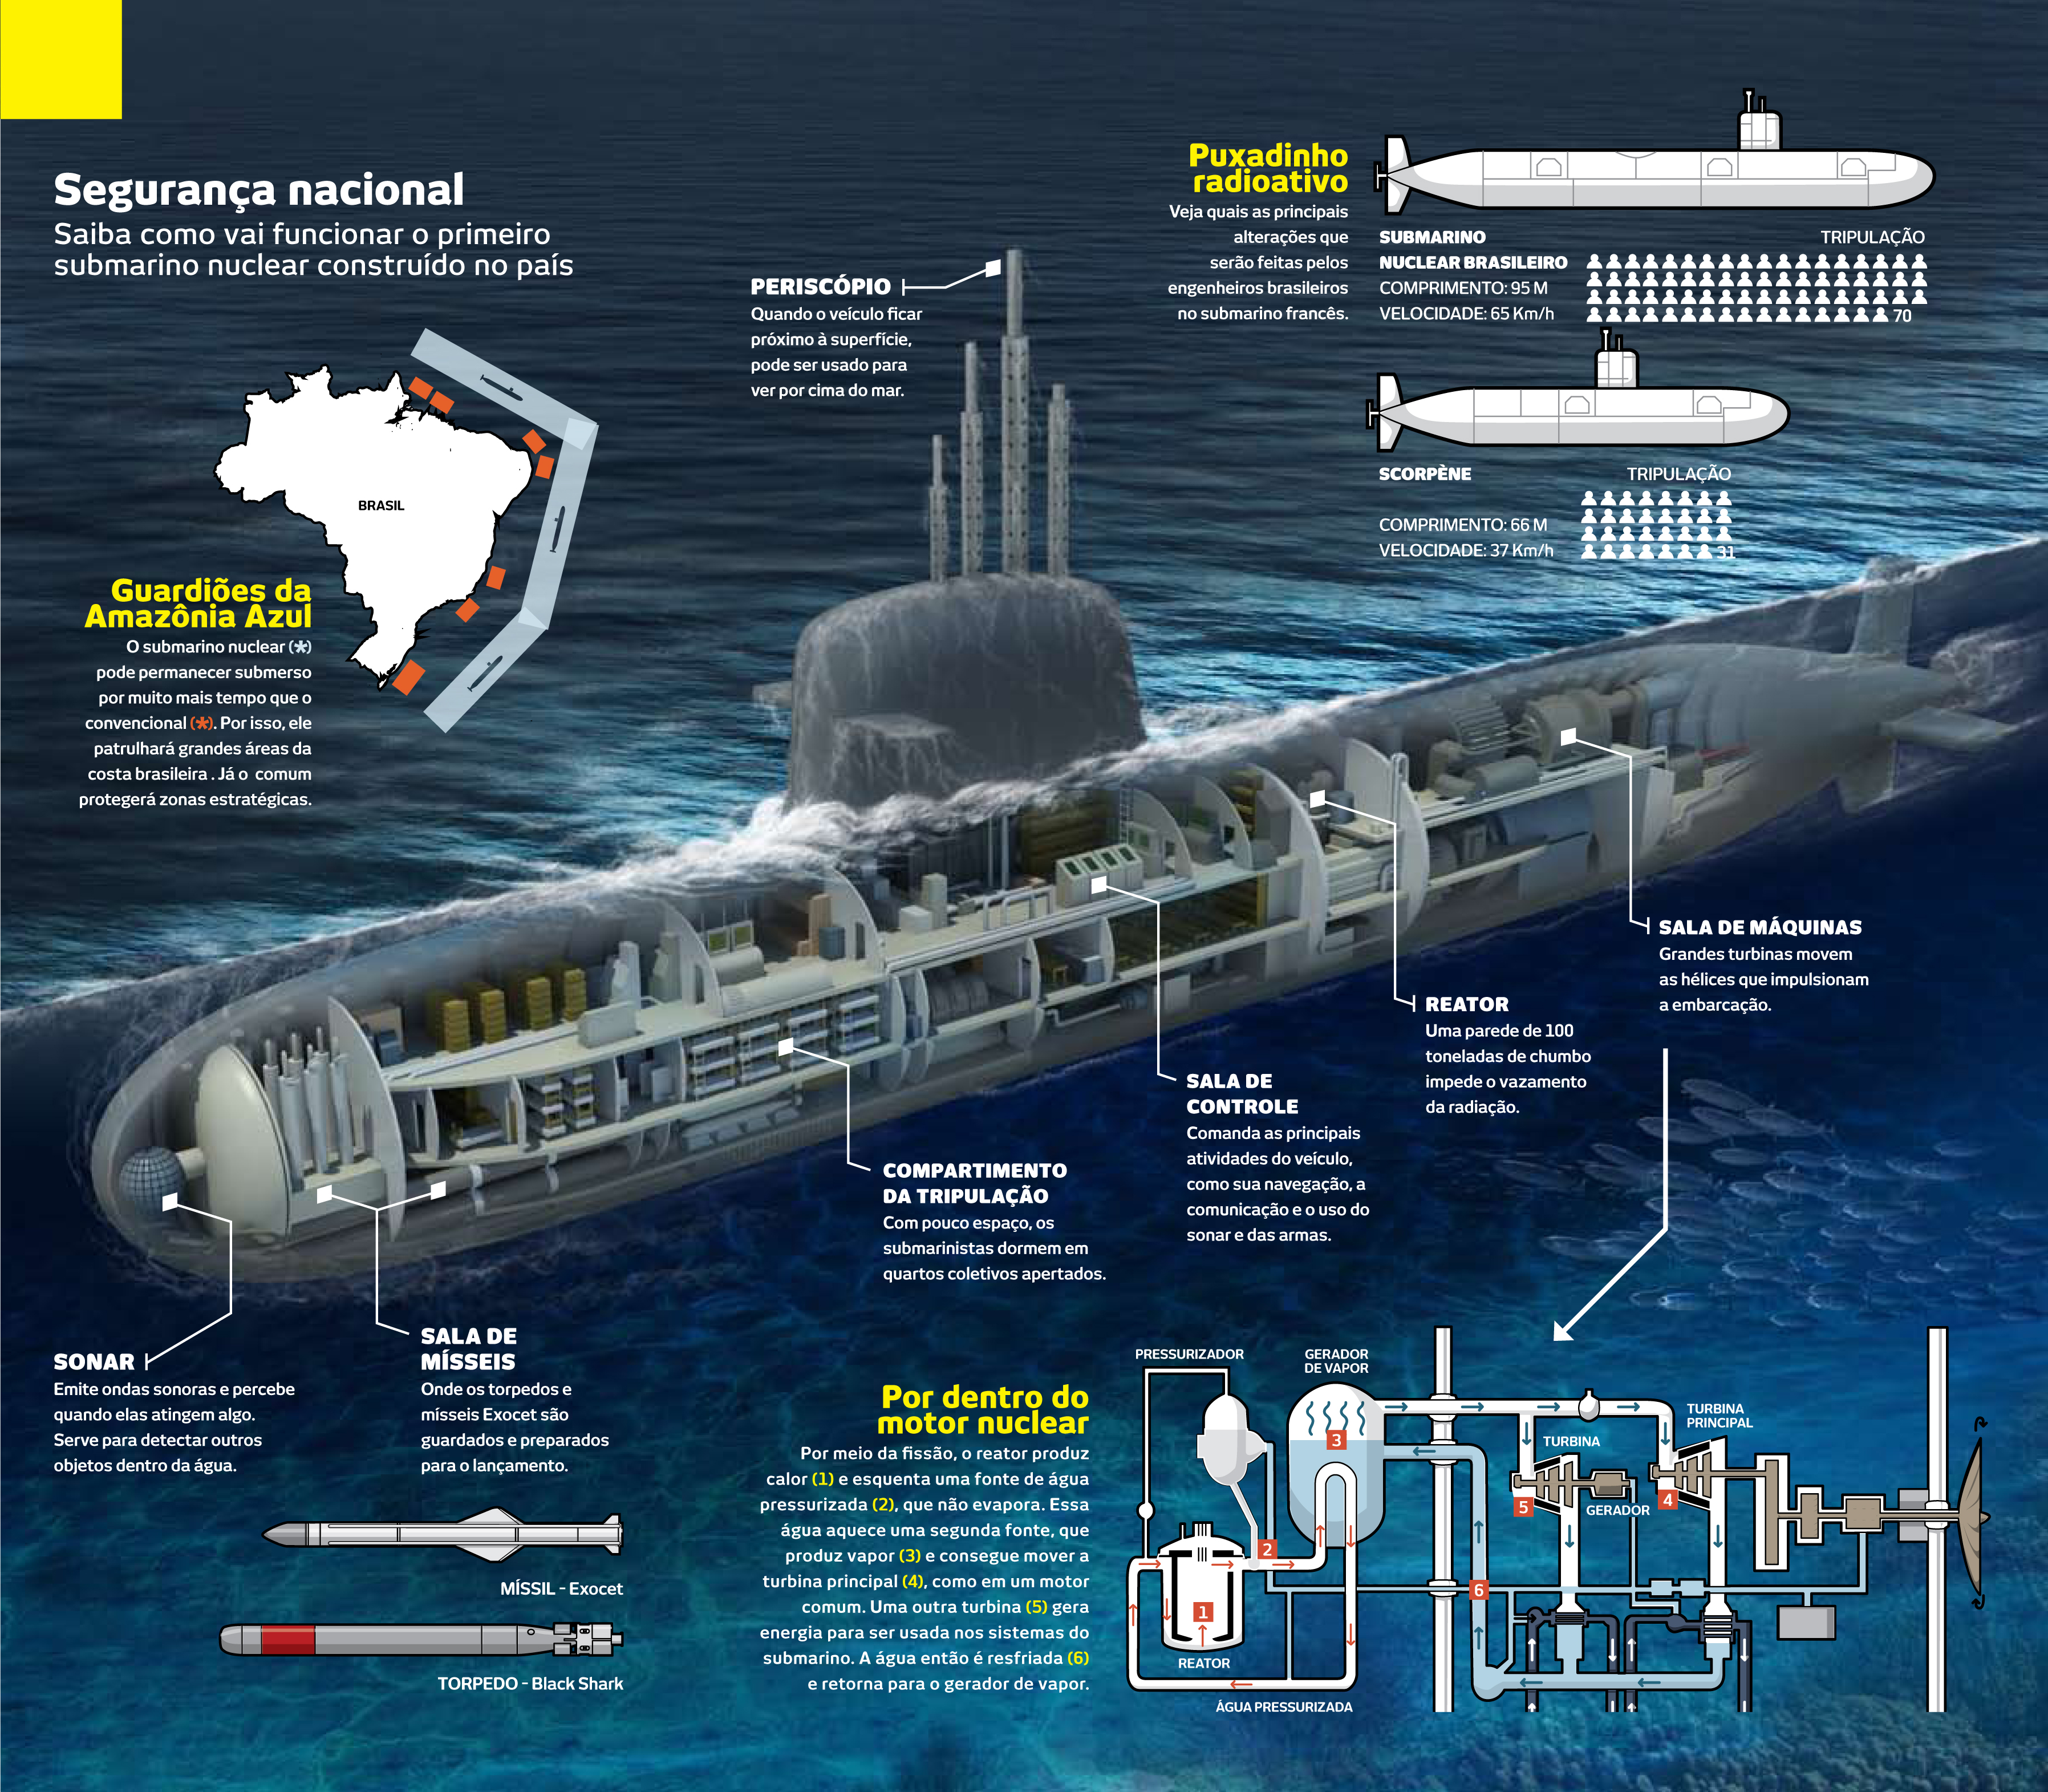 The-first-nuclear-submarine-built-in-Brazil.jpg